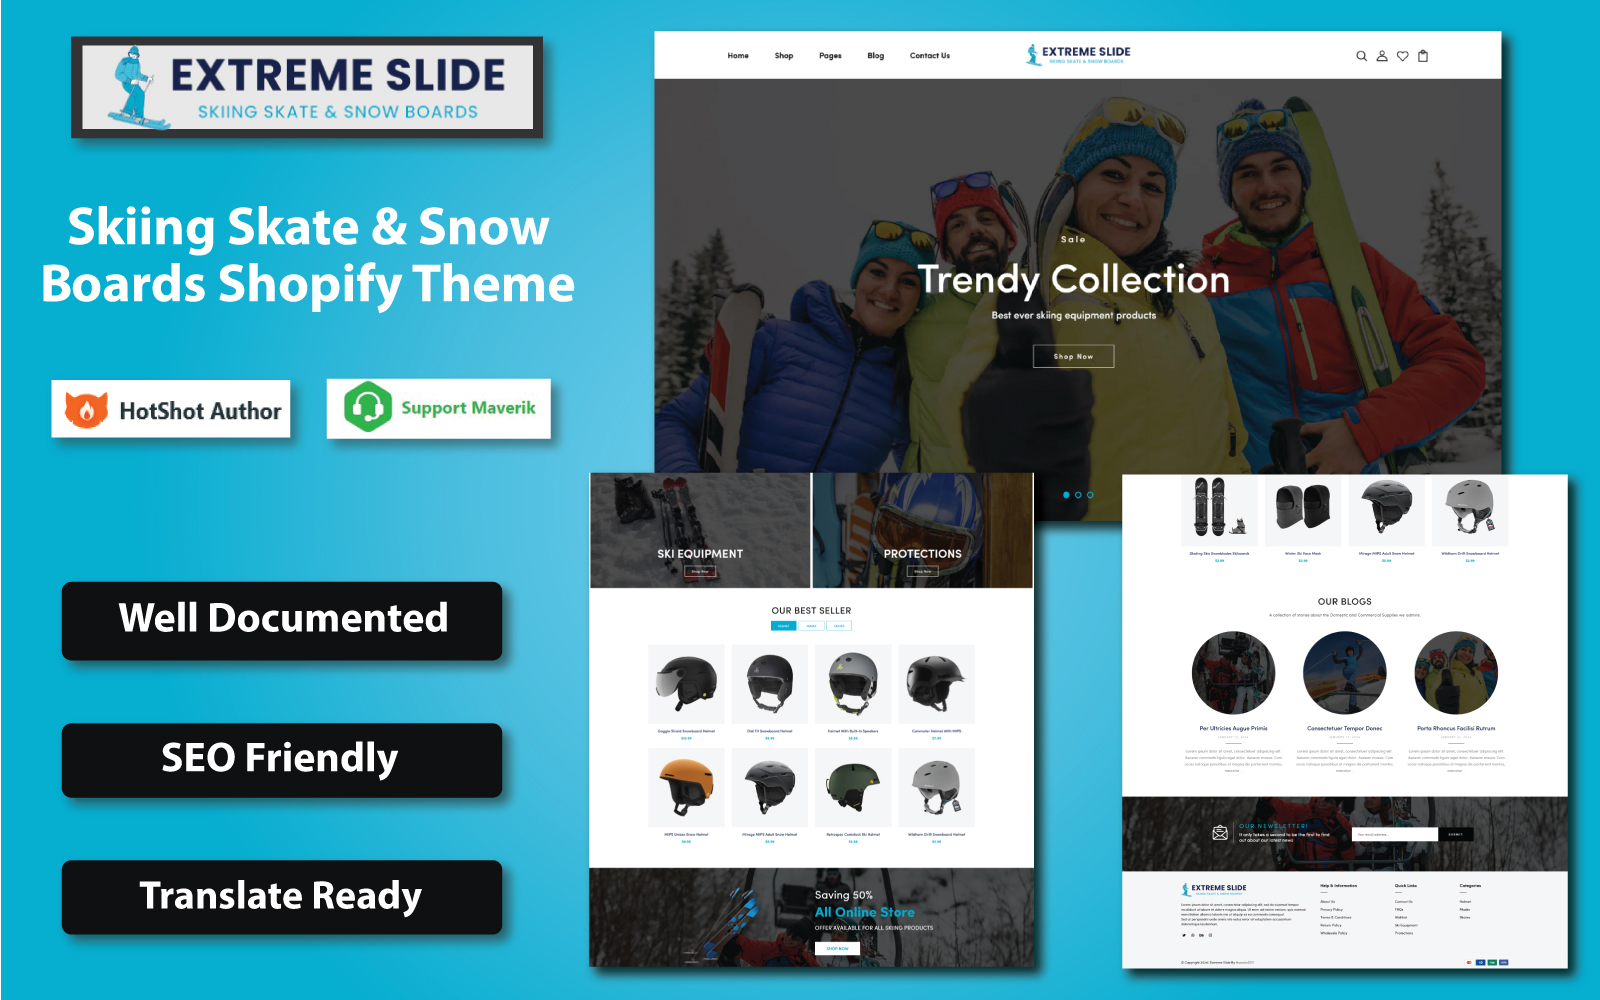 Extreme Slide - Skiing Skate & Snow Boards Shopify Theme